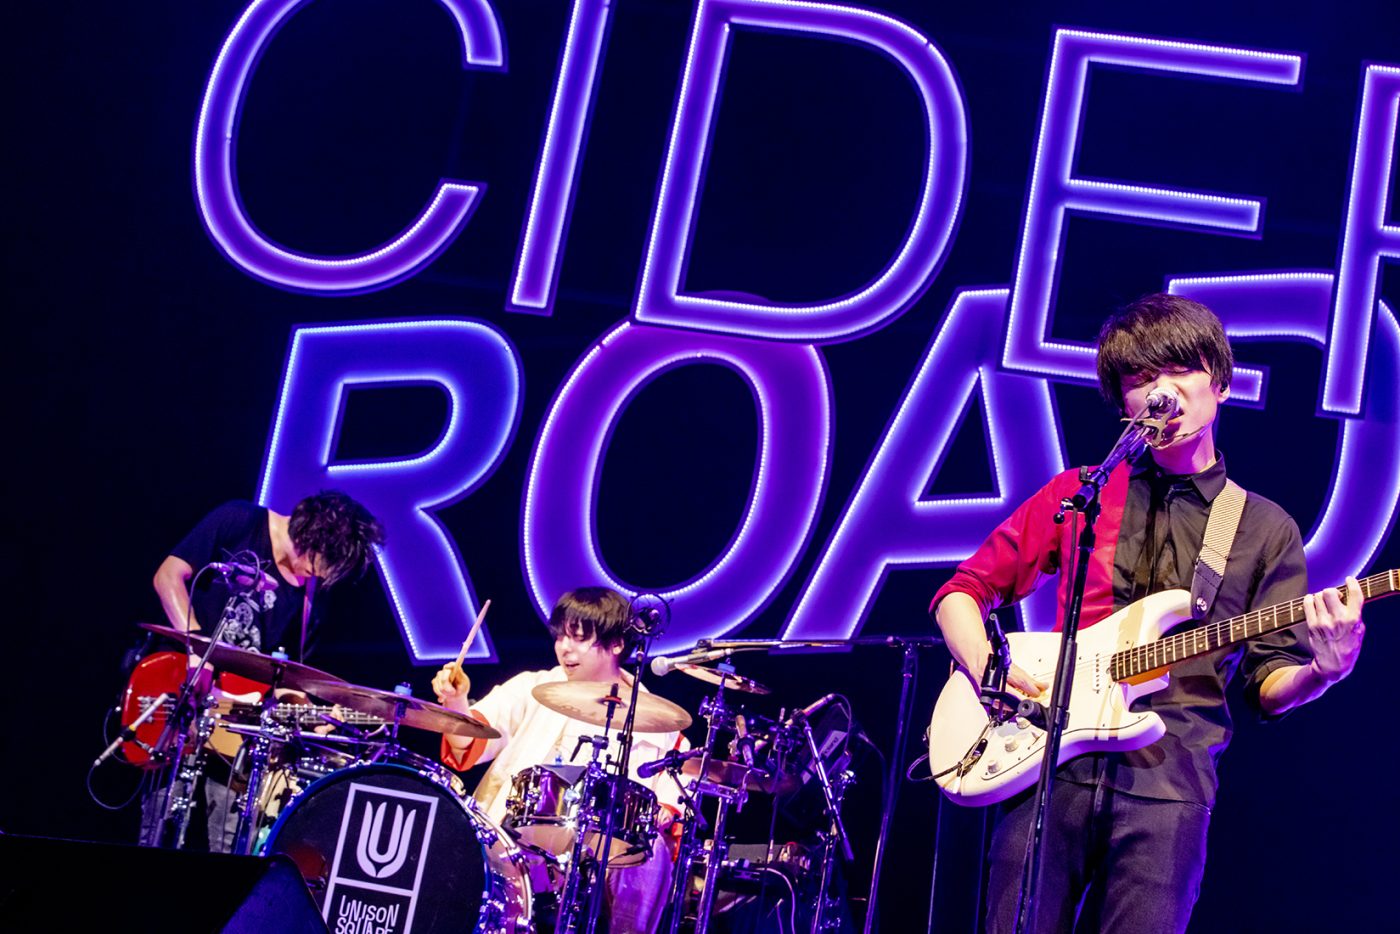 UNISON SQUARE GARDEN、『CIDER ROAD』リバイバルツアーより札幌公演の映像を一部公開 - 画像一覧（1/2）